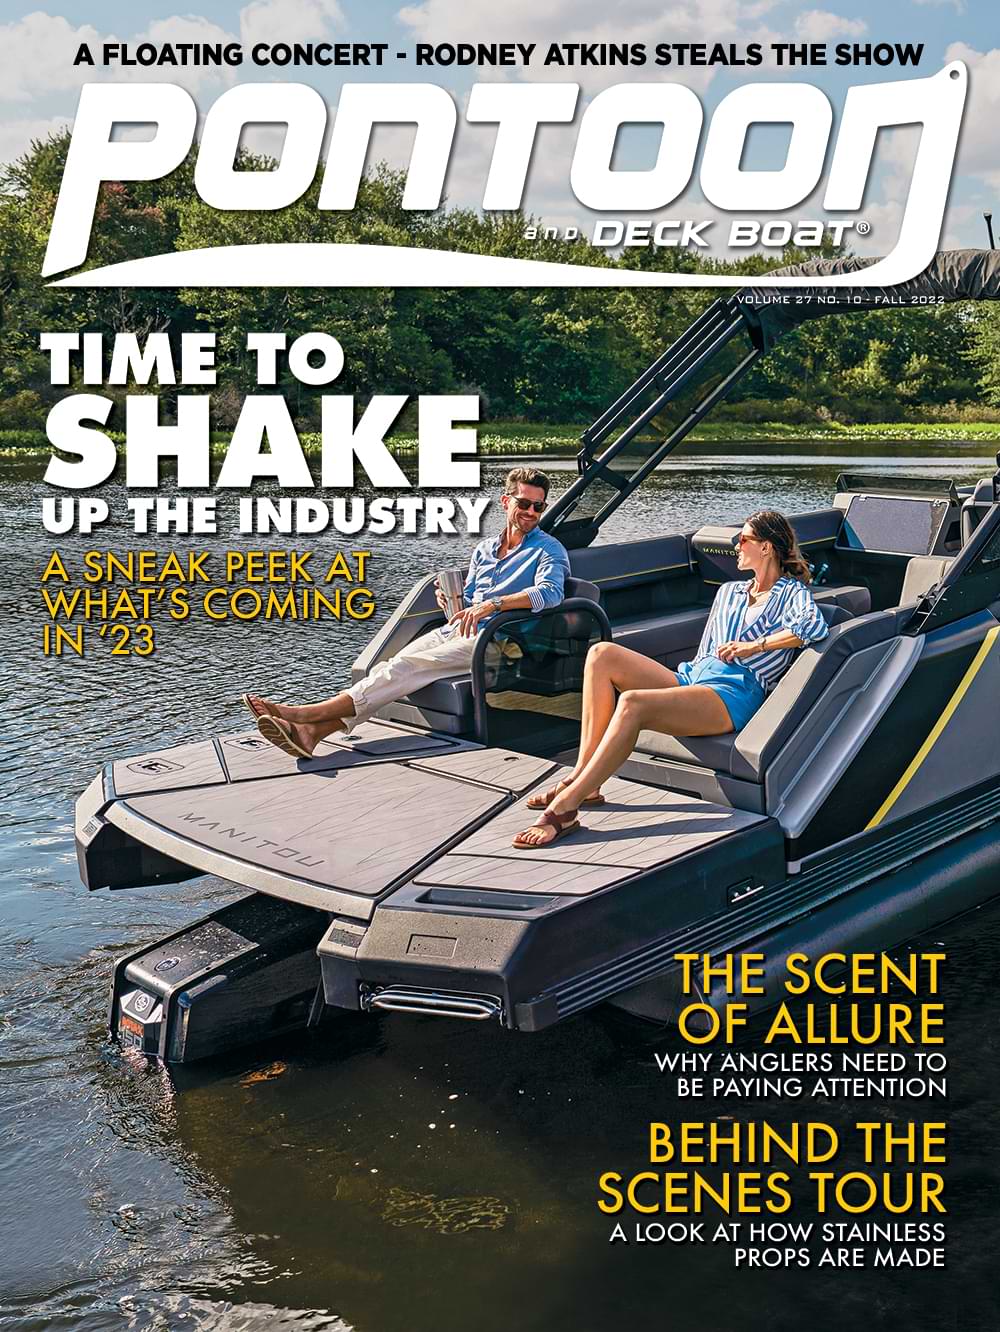 Pontoon and Deck Boat Fall 2022 cover